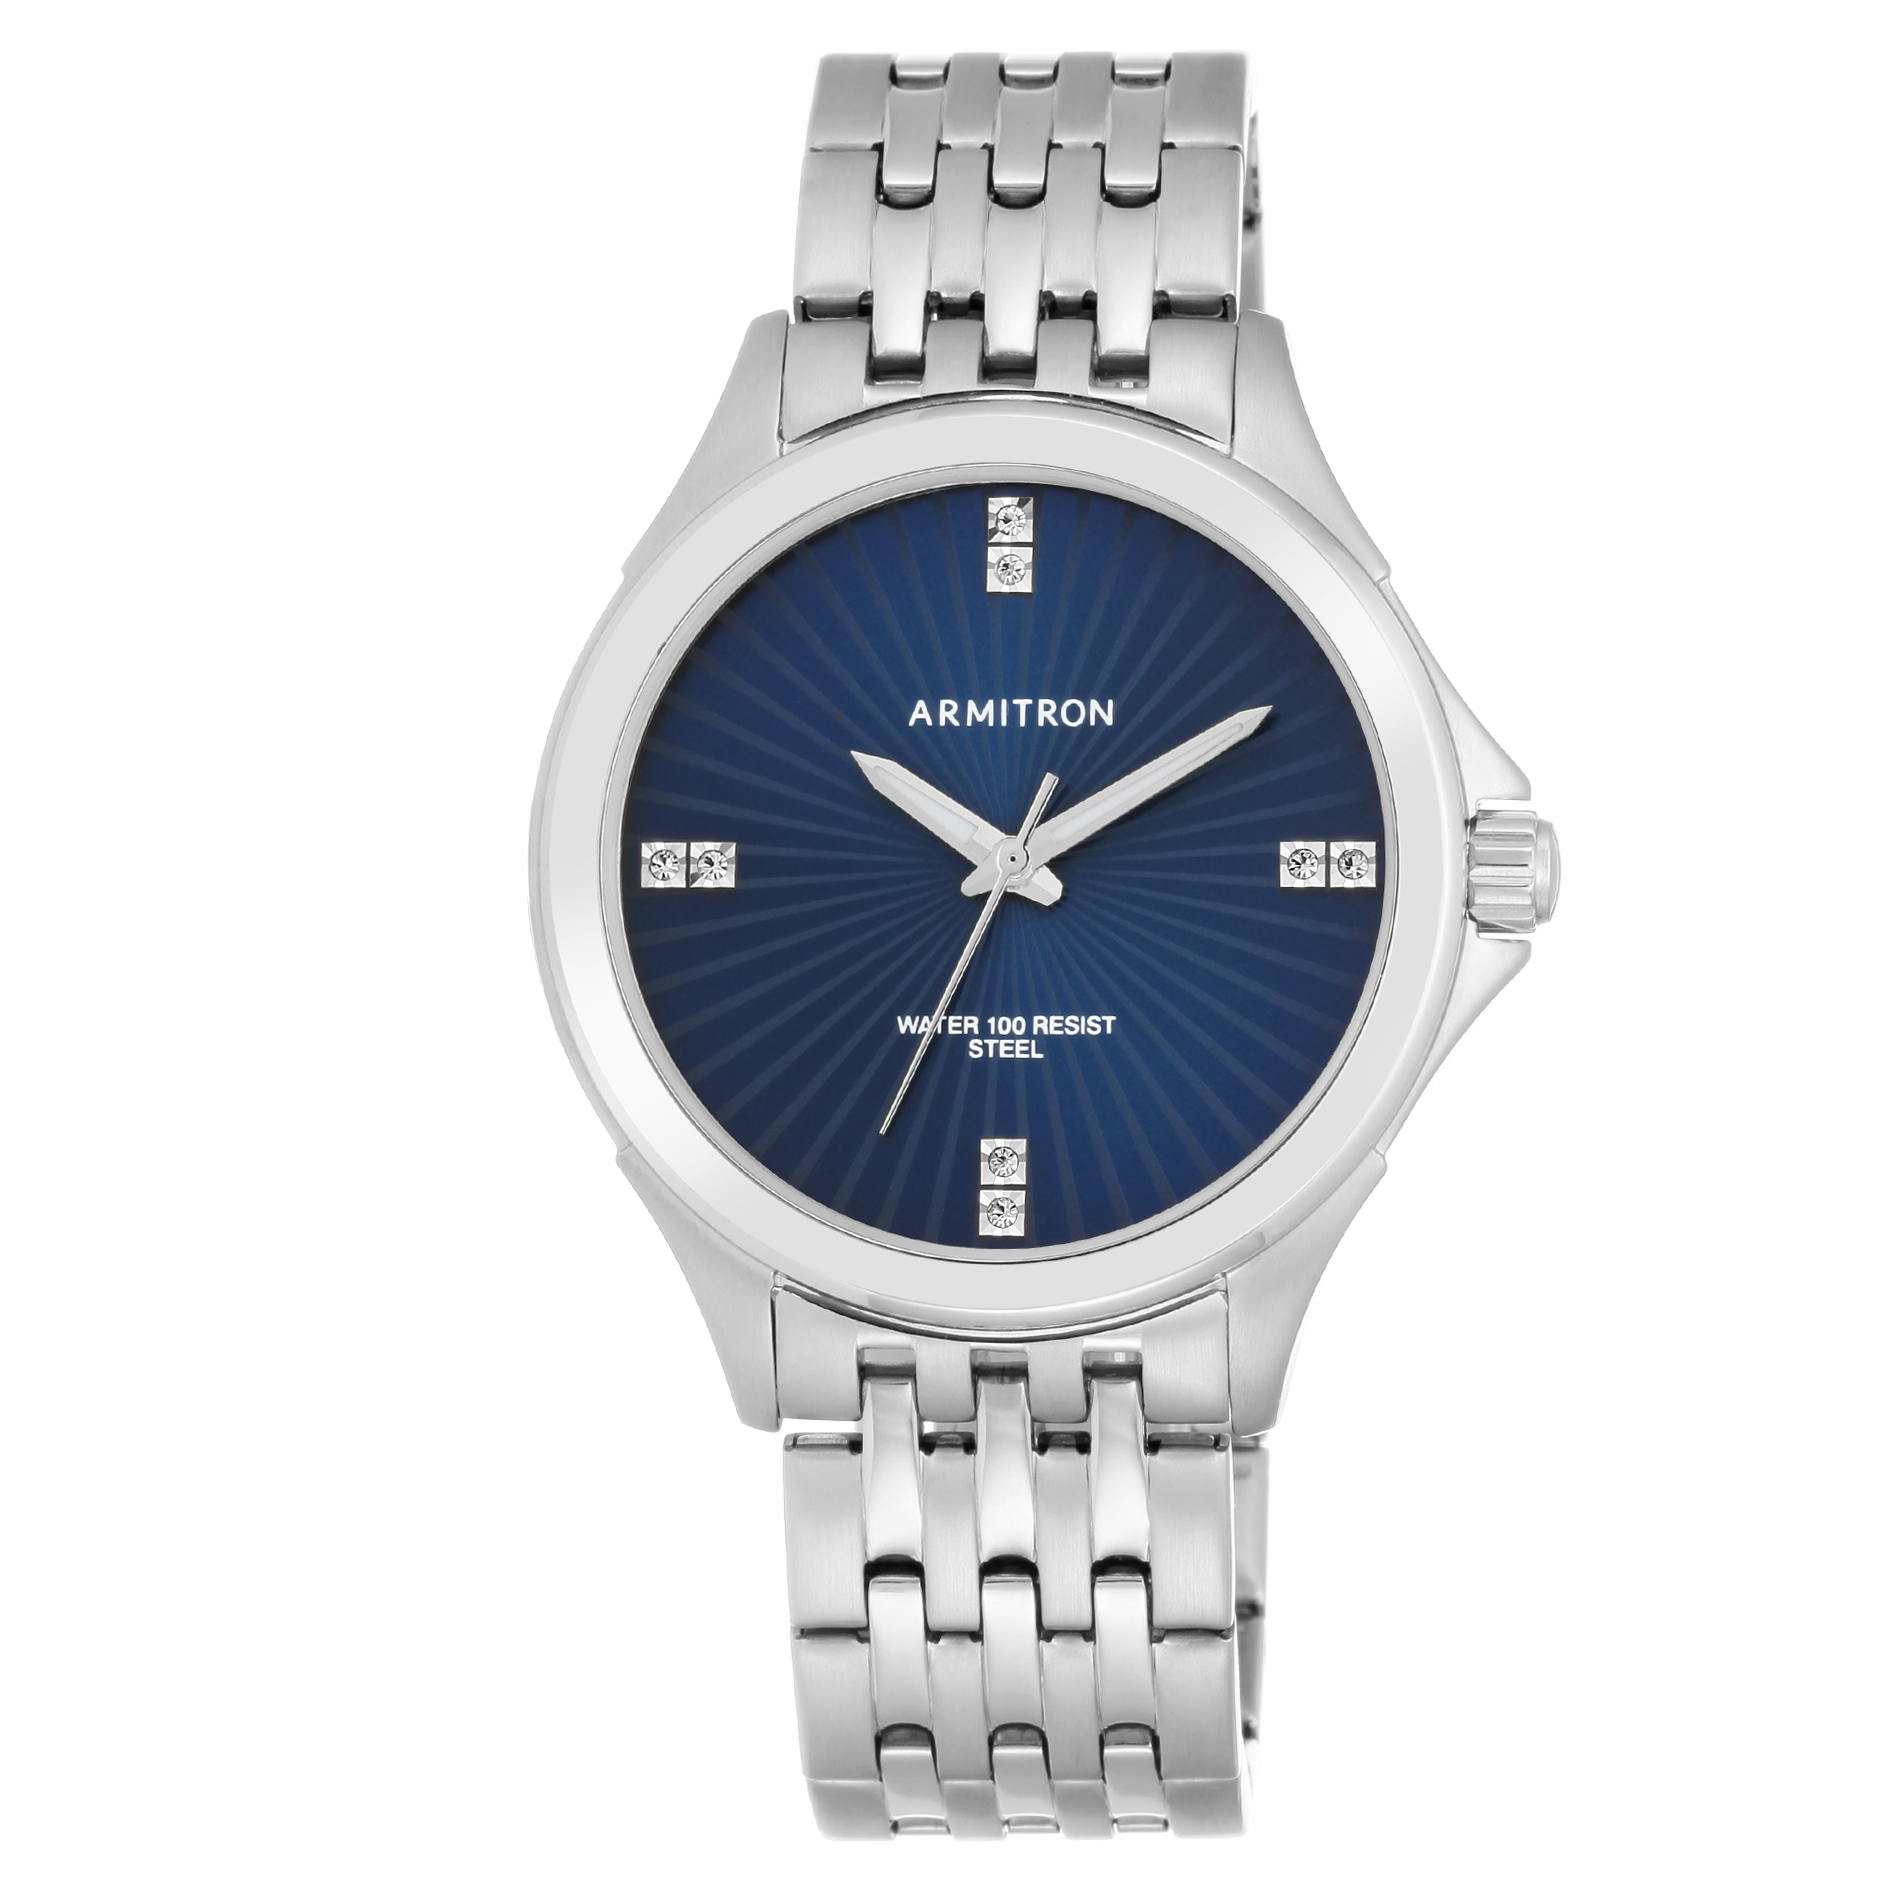 Armitron Men's Watch | Shop Your Way: Online Shopping & Earn Points on